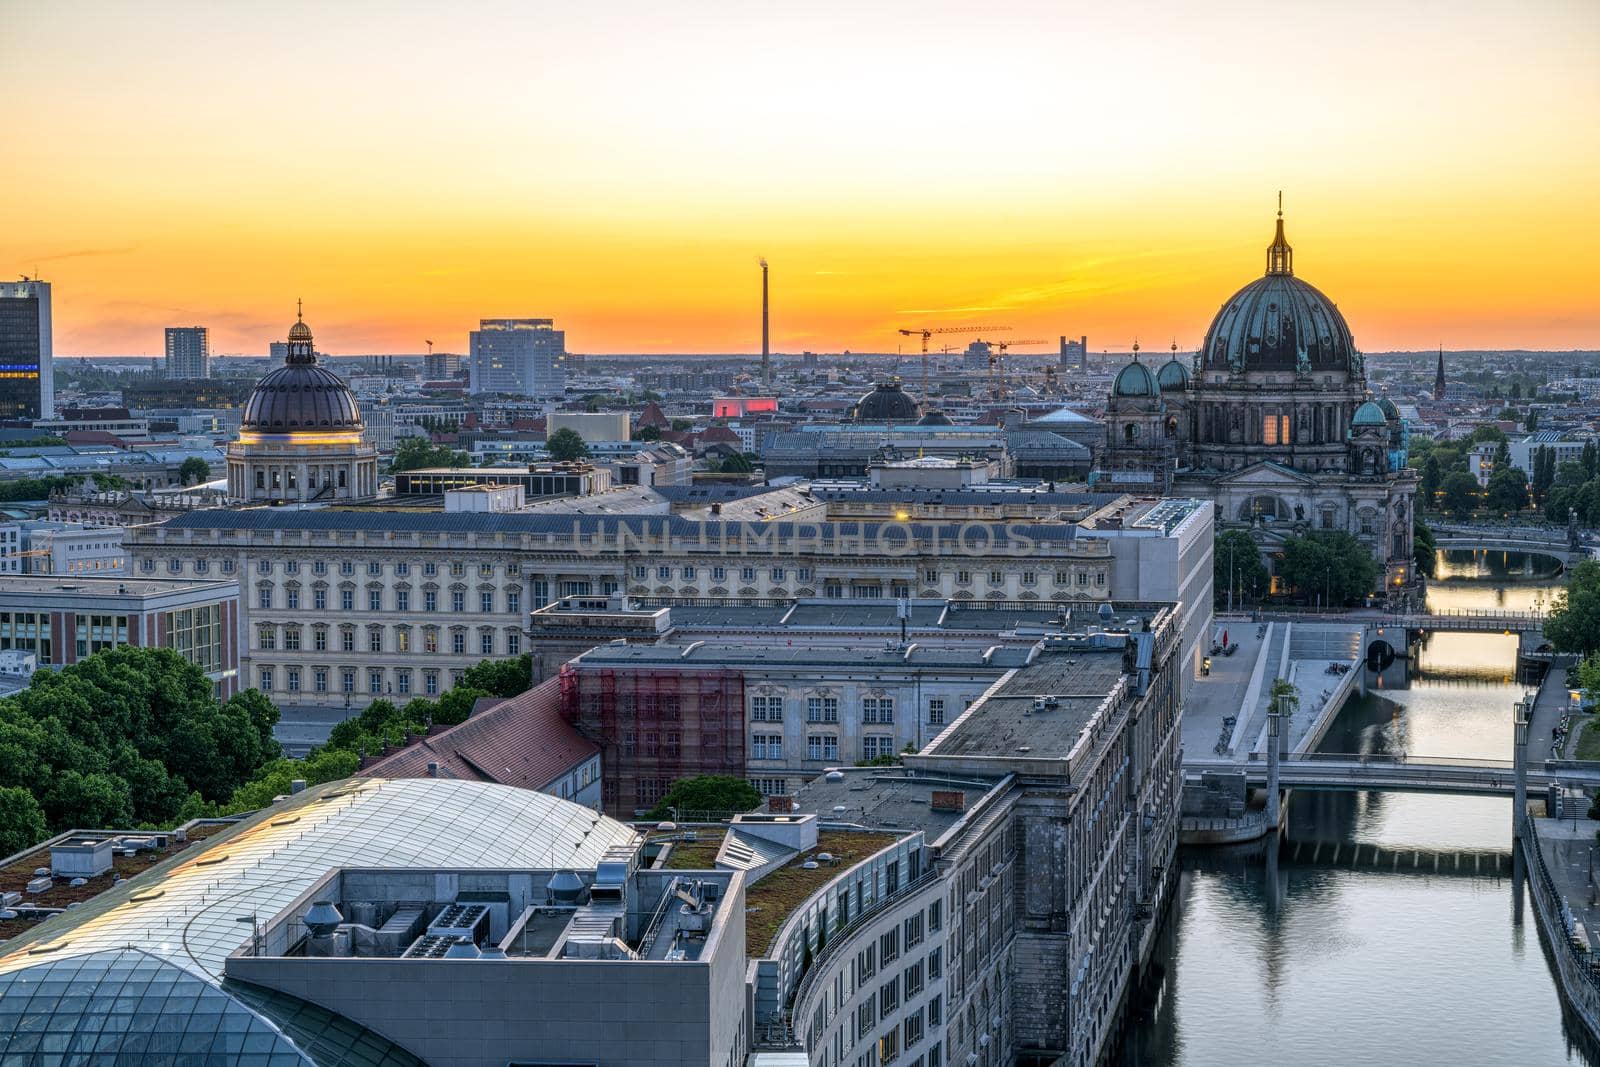 The river Spree and Berlin Mitte after sunset with the cathedral in the back